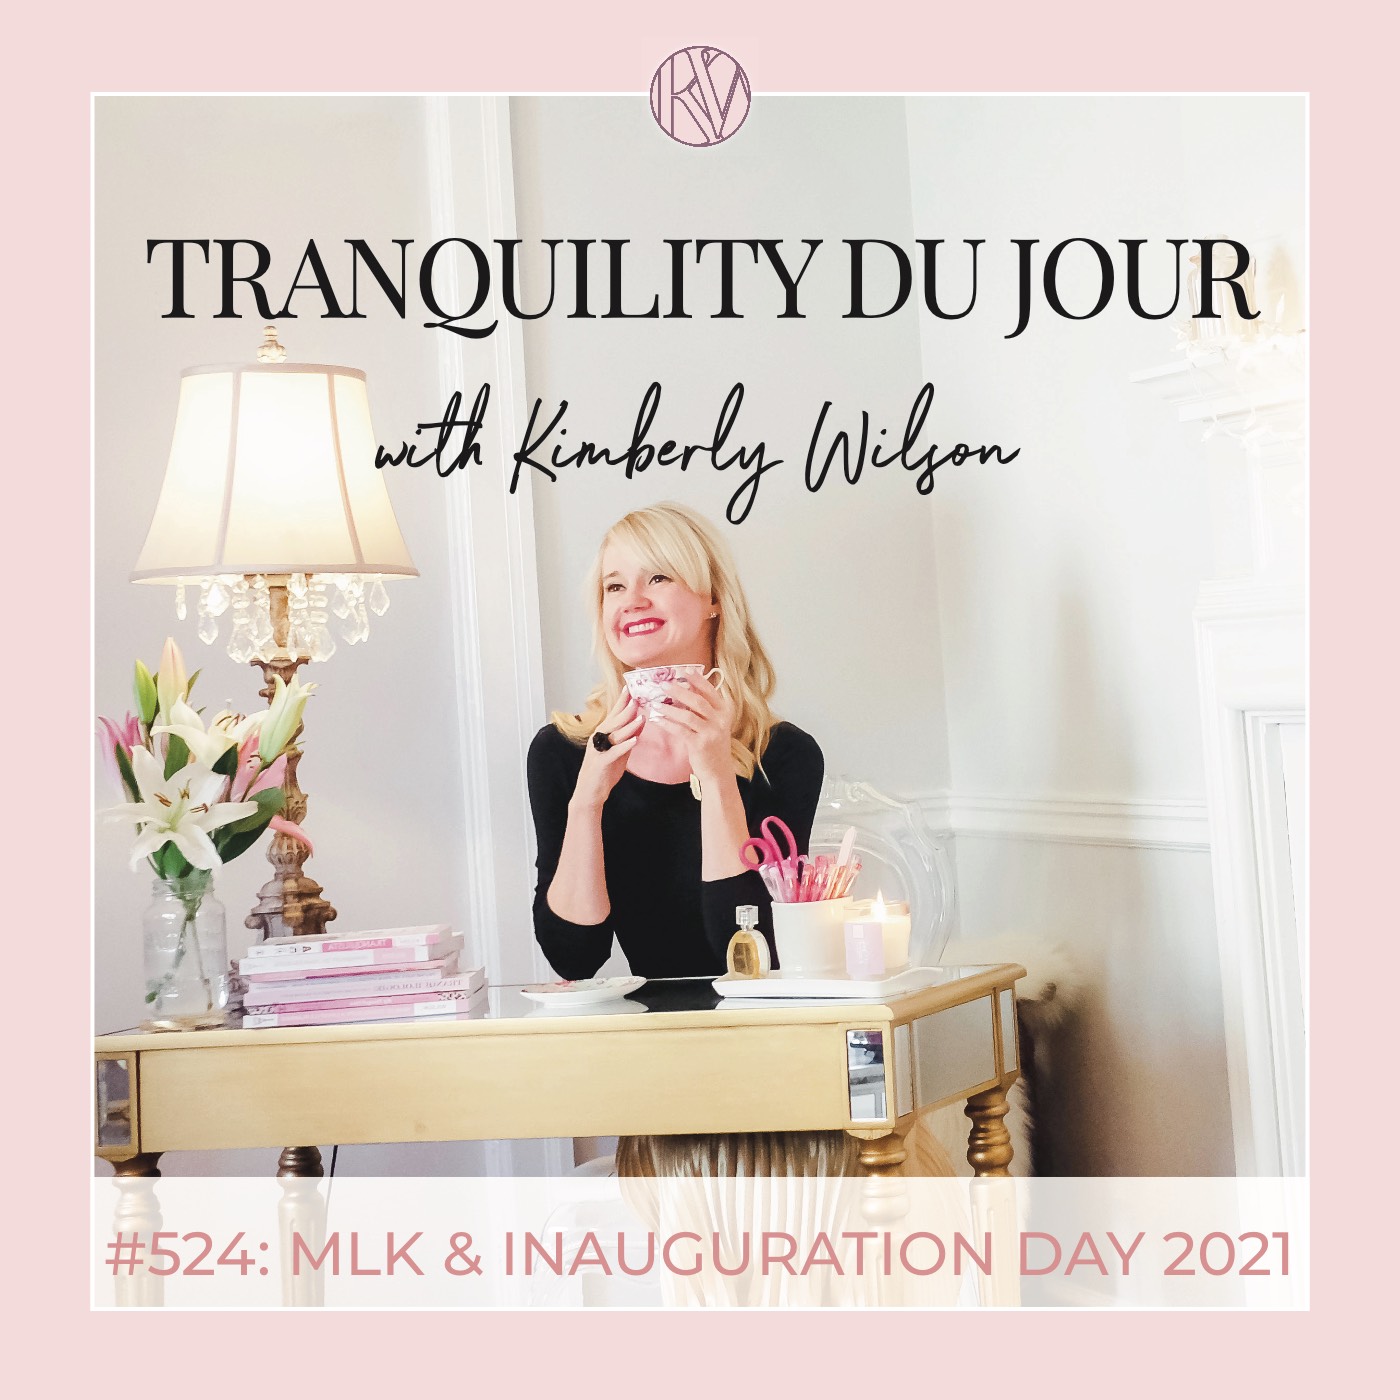 Tranquility du Jour #524: MLK & Inauguration Day 2021